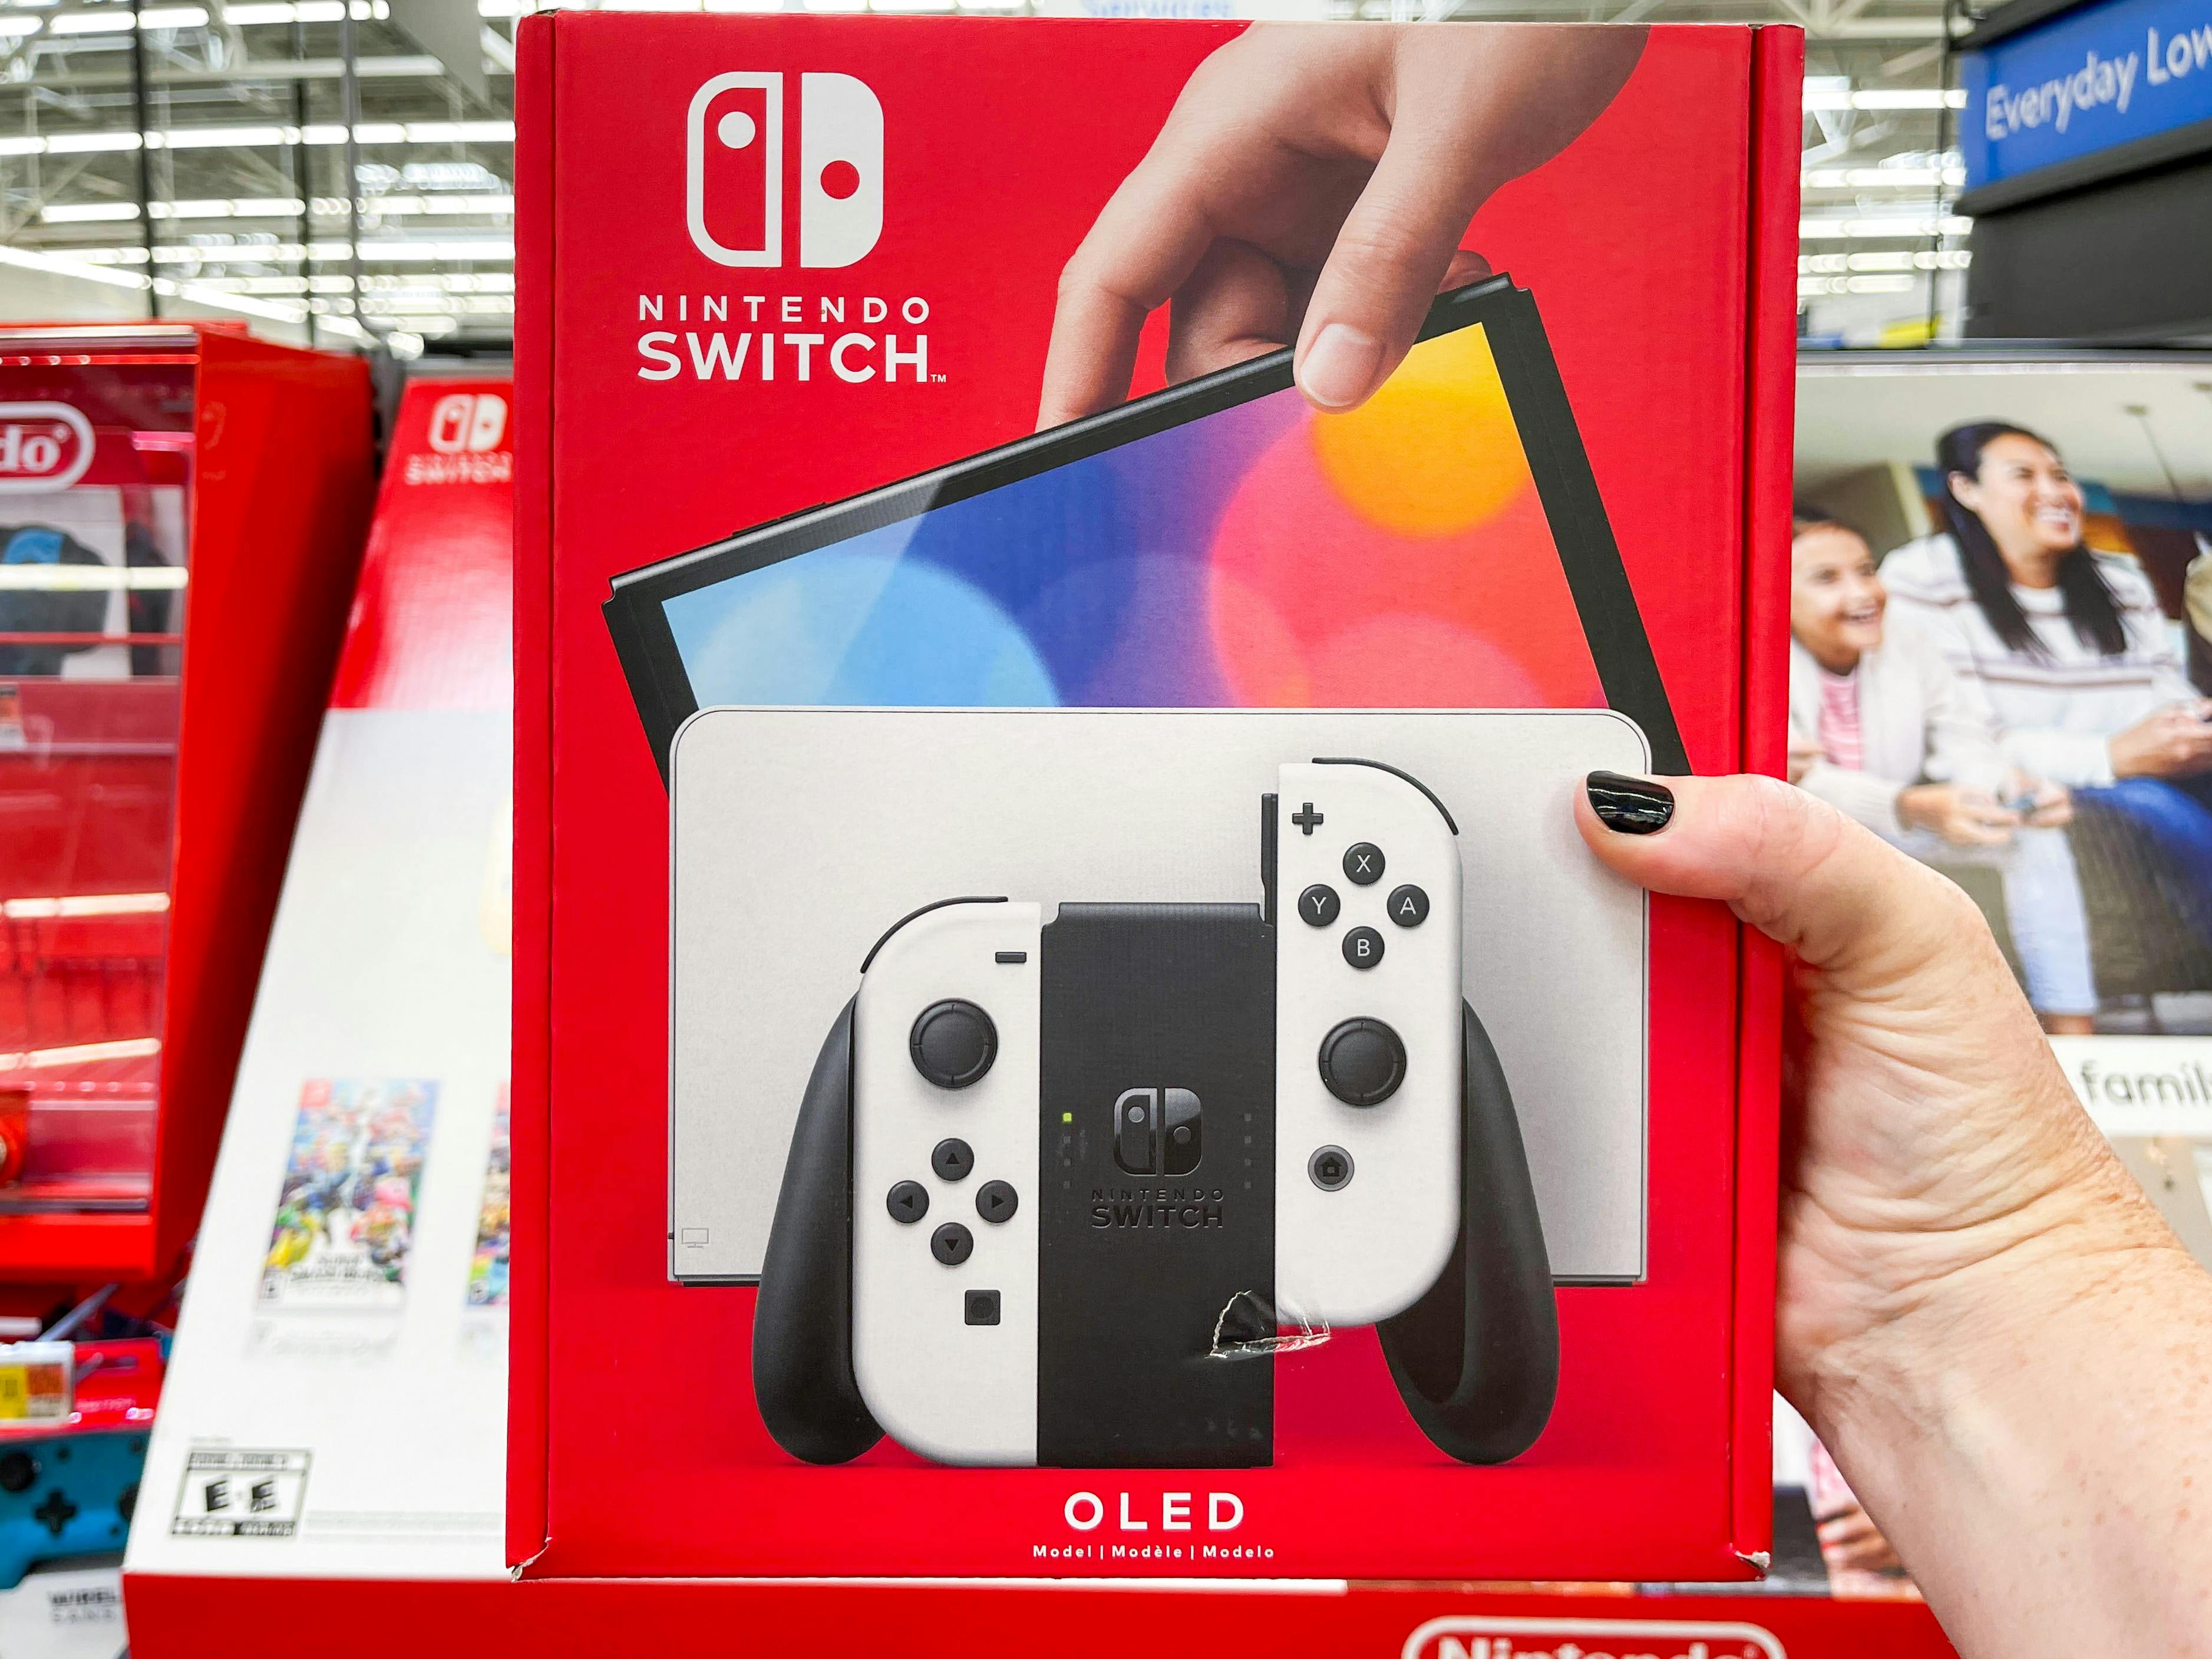 trending-best-hot-toys-holiday-gifts-buy-before-they-sell-out-walmart-nintendo-switch-oled-video-game-console-42